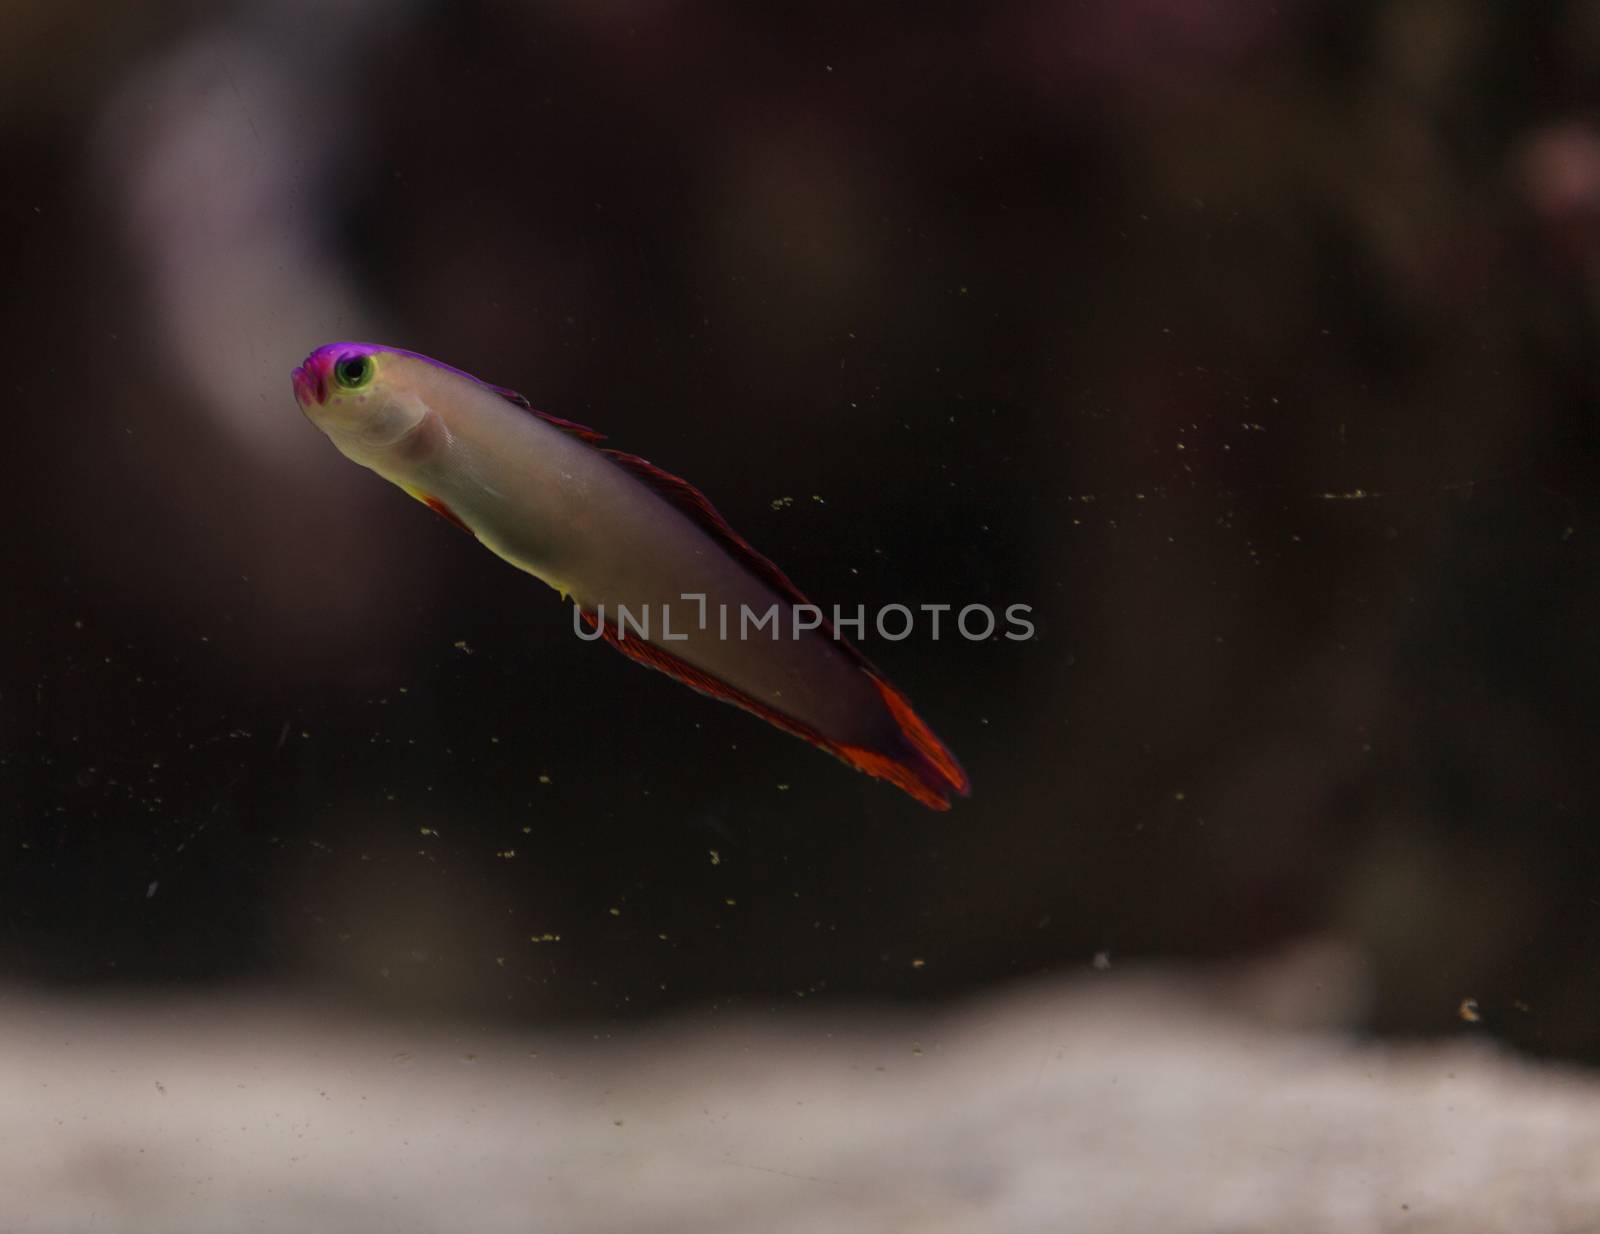 Purple cap firefish, Nemateleotris decora, darts through the saltwater on a tropical reef in the ocean. These colorful fish are purple and white with red.